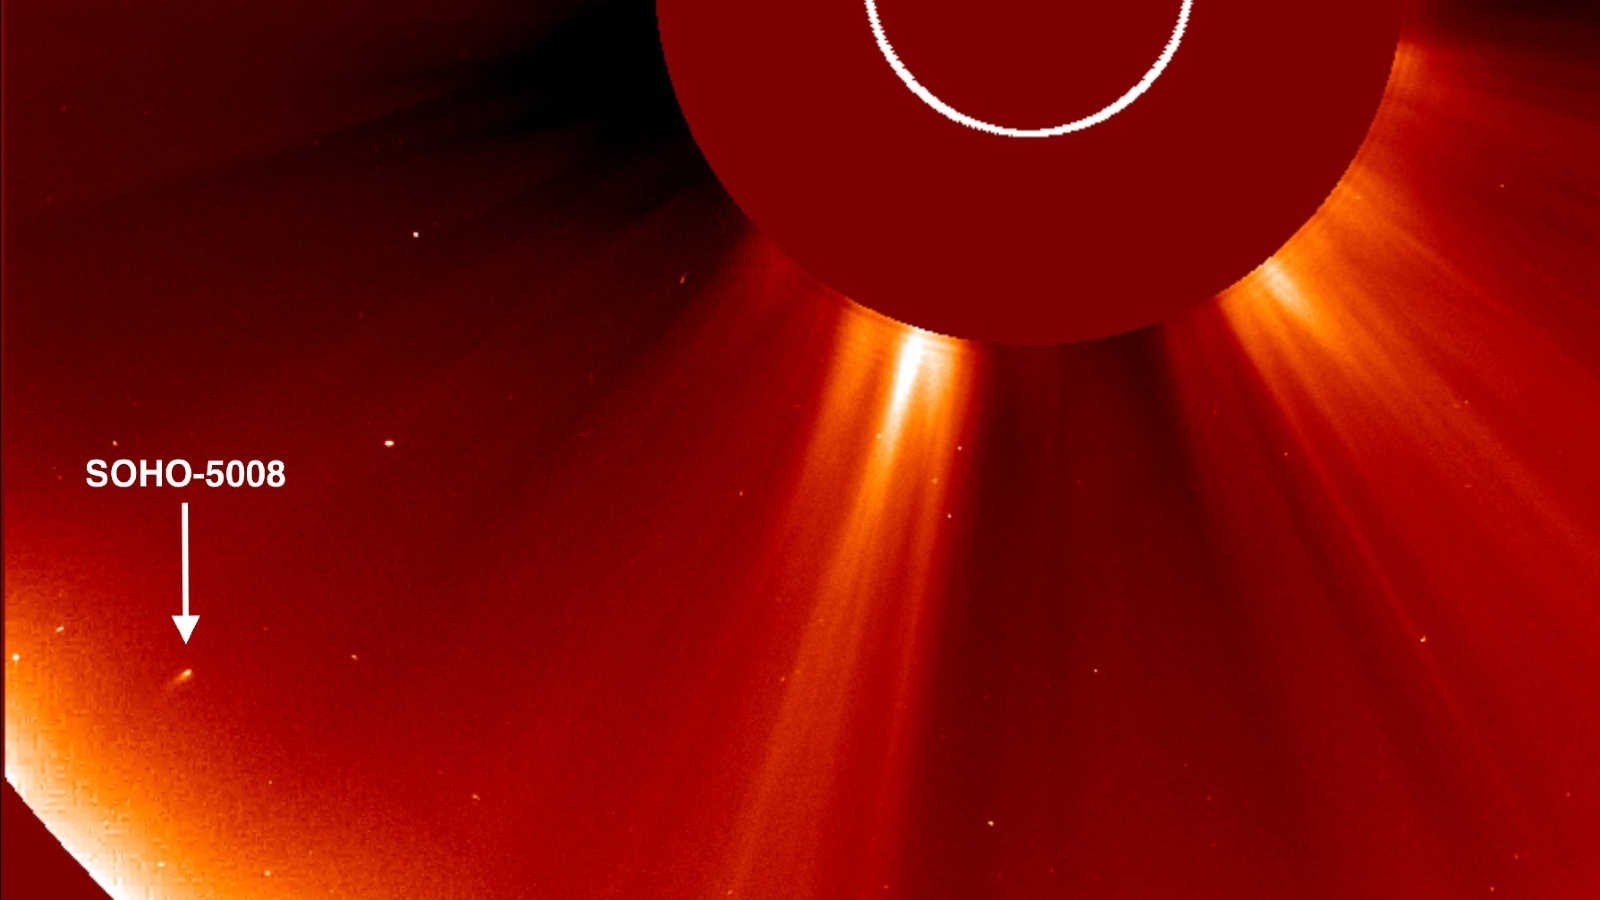 An orange coronagraph with an arrow pointing to the new comet